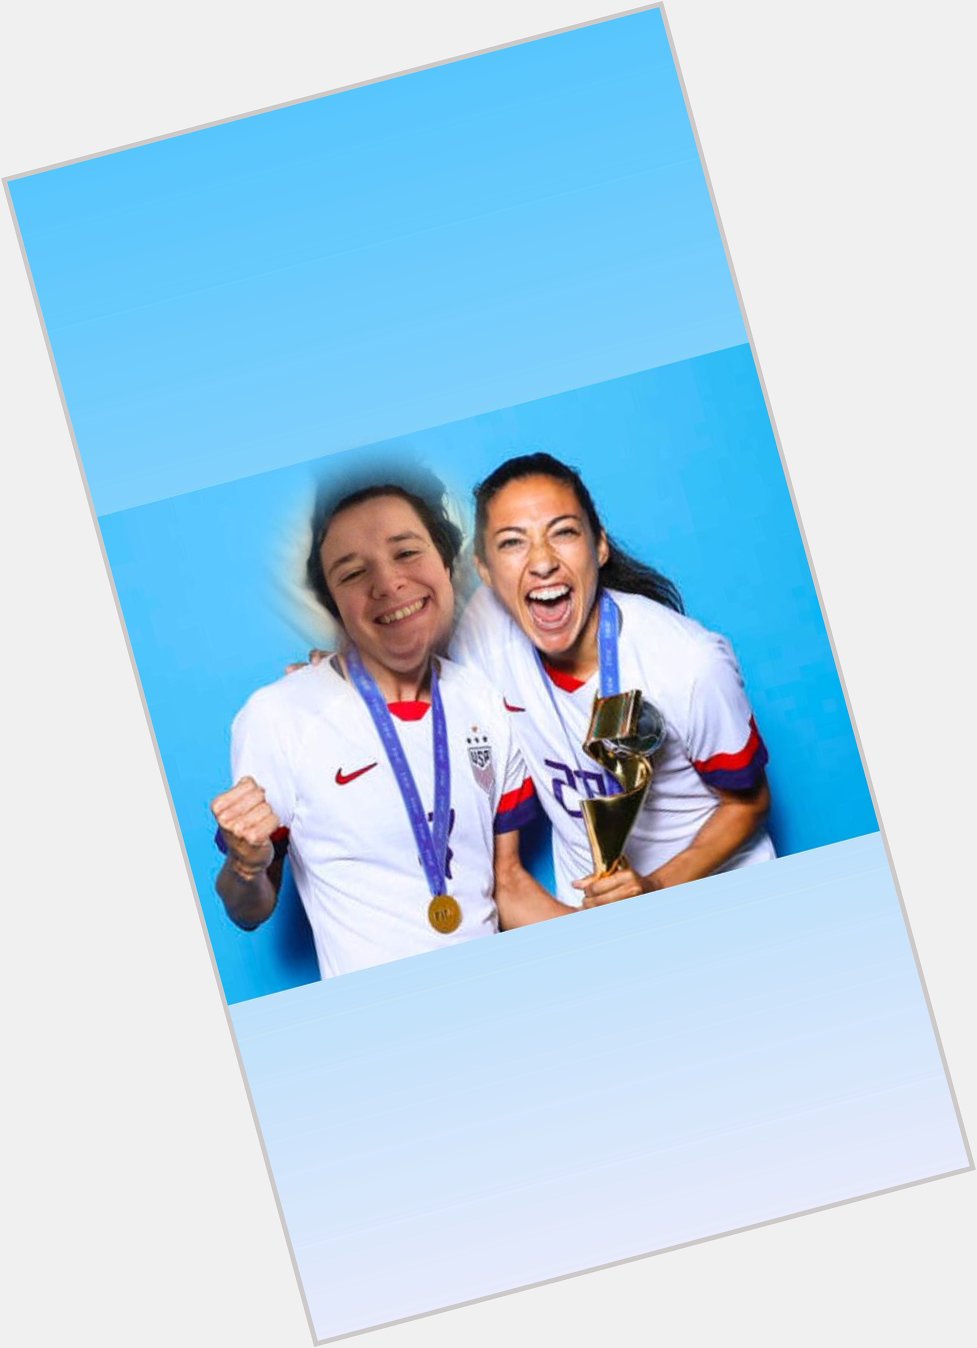 Happy birthday to me and my good friend Christen Press 